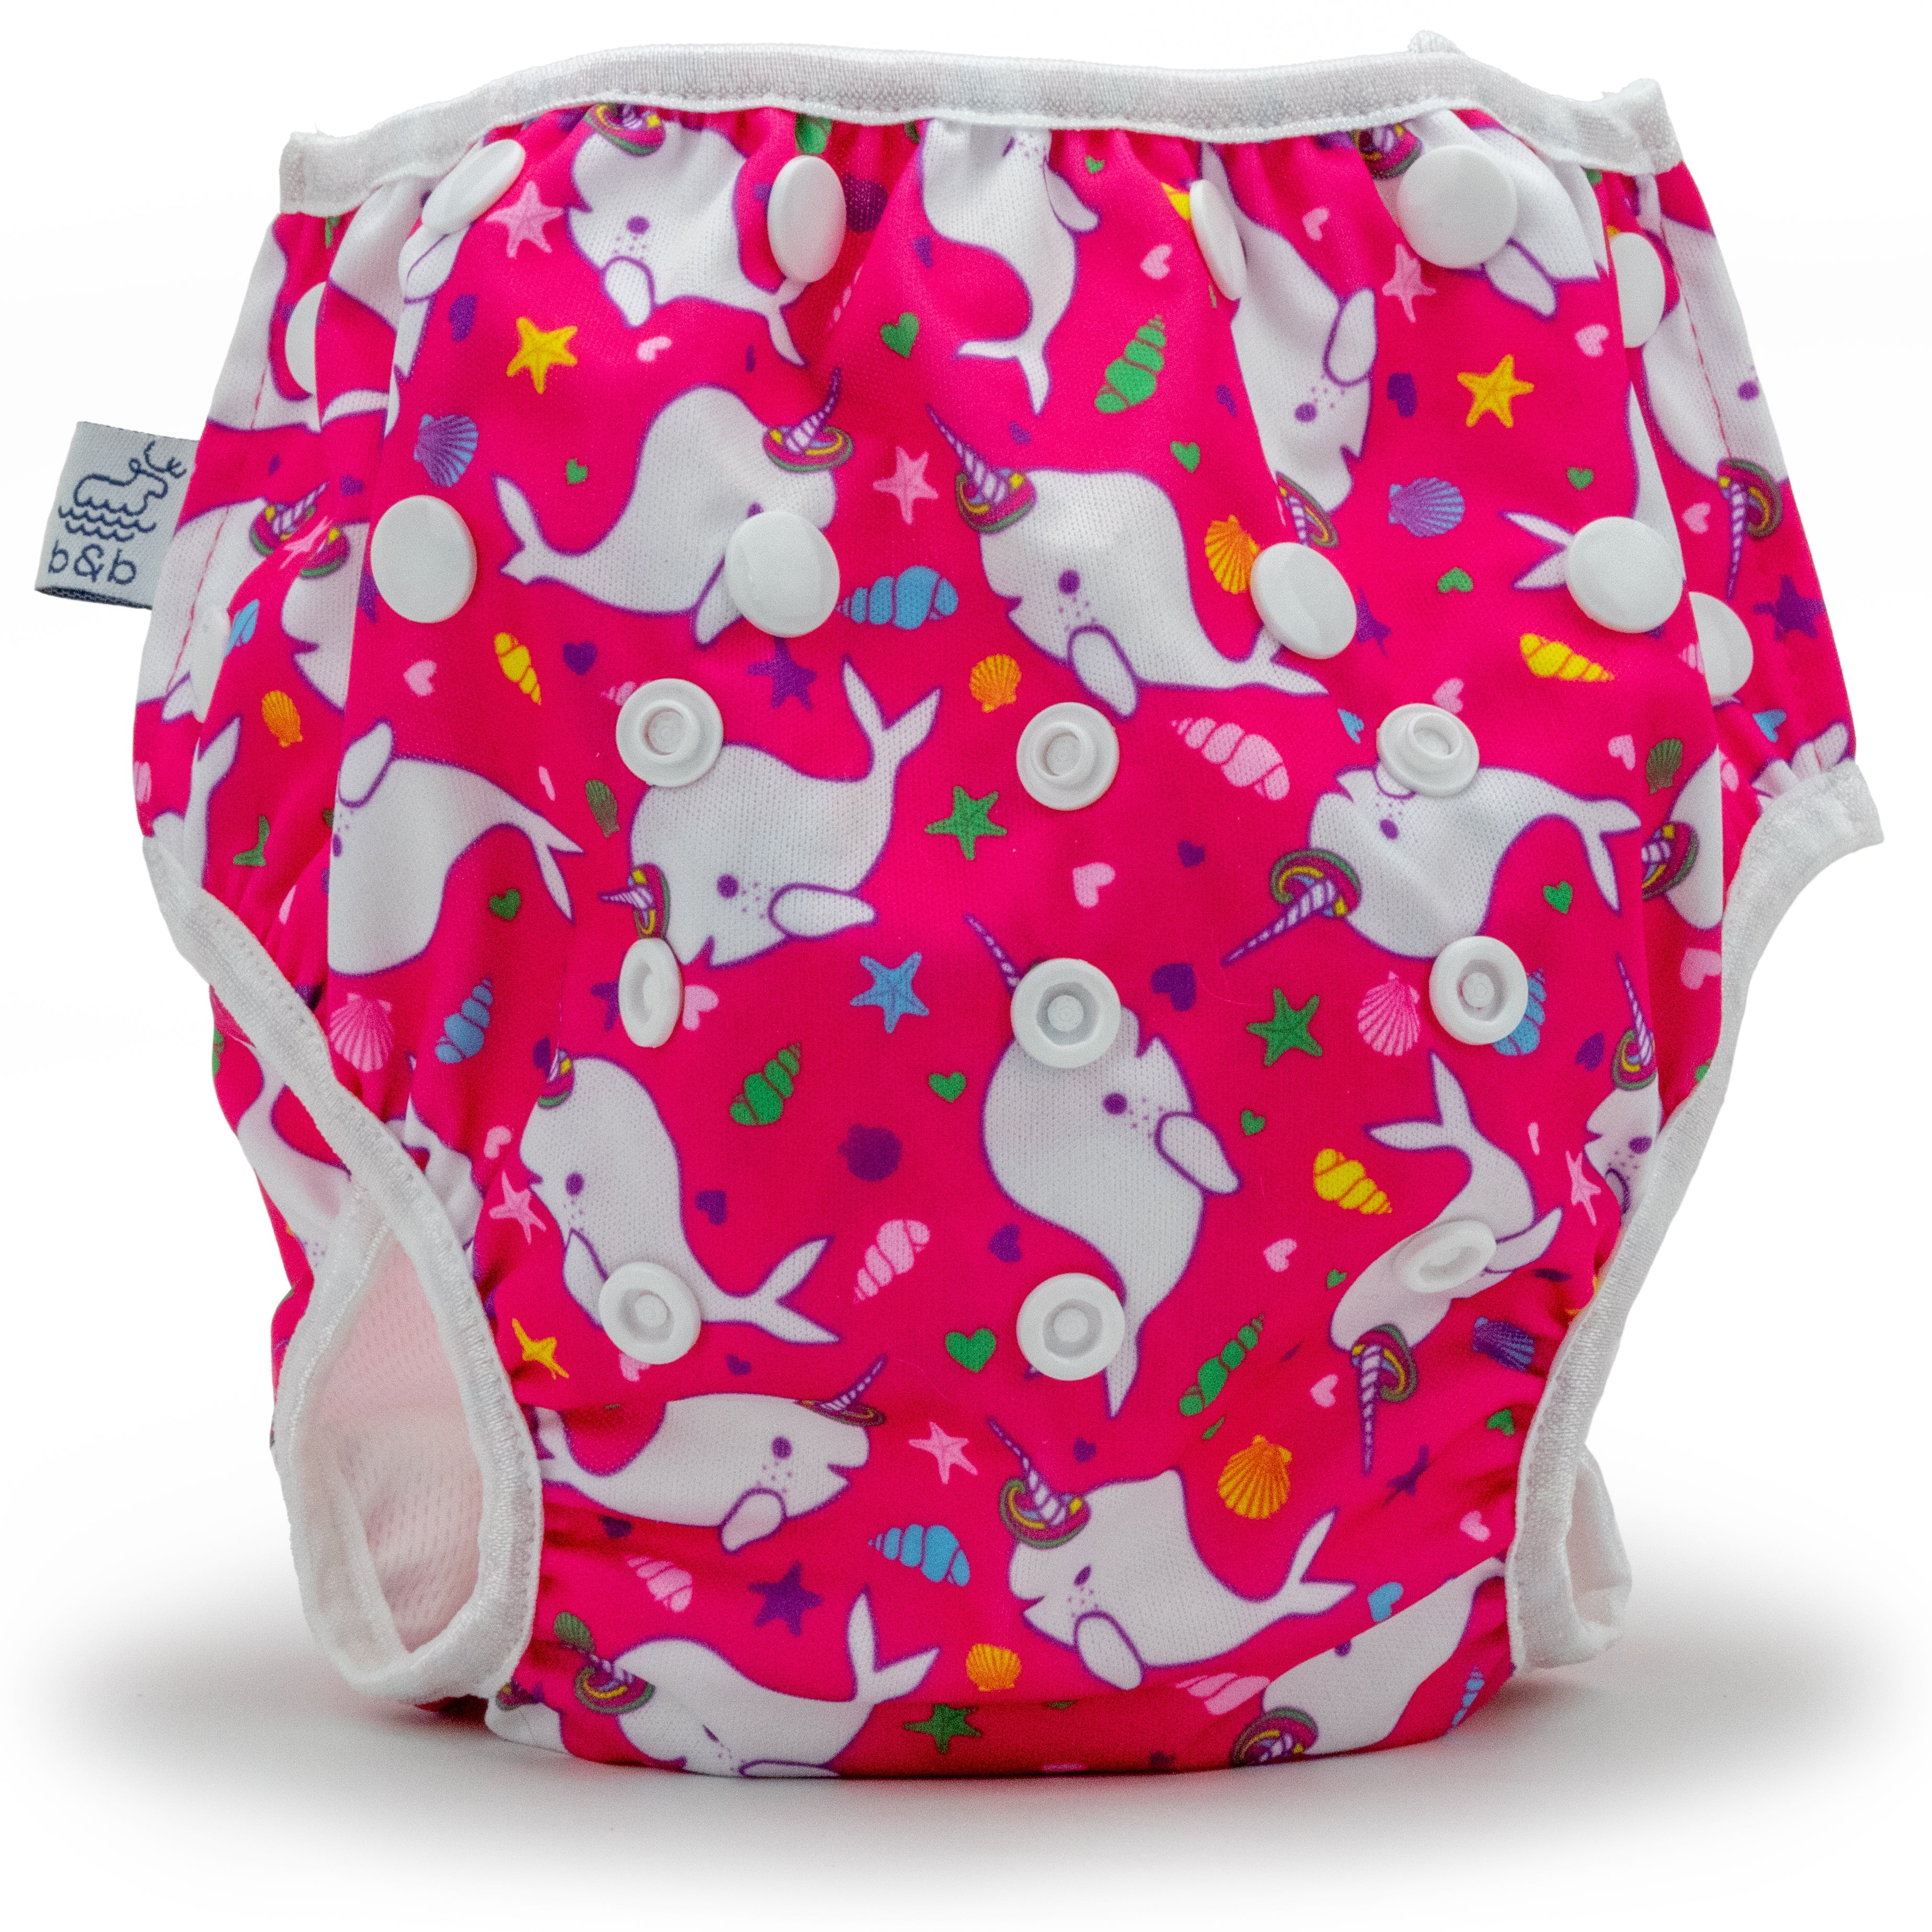 Narwhals 2-5 years Nageuret Swim Diaper (Hot Pink) by Beau & Belle Littles